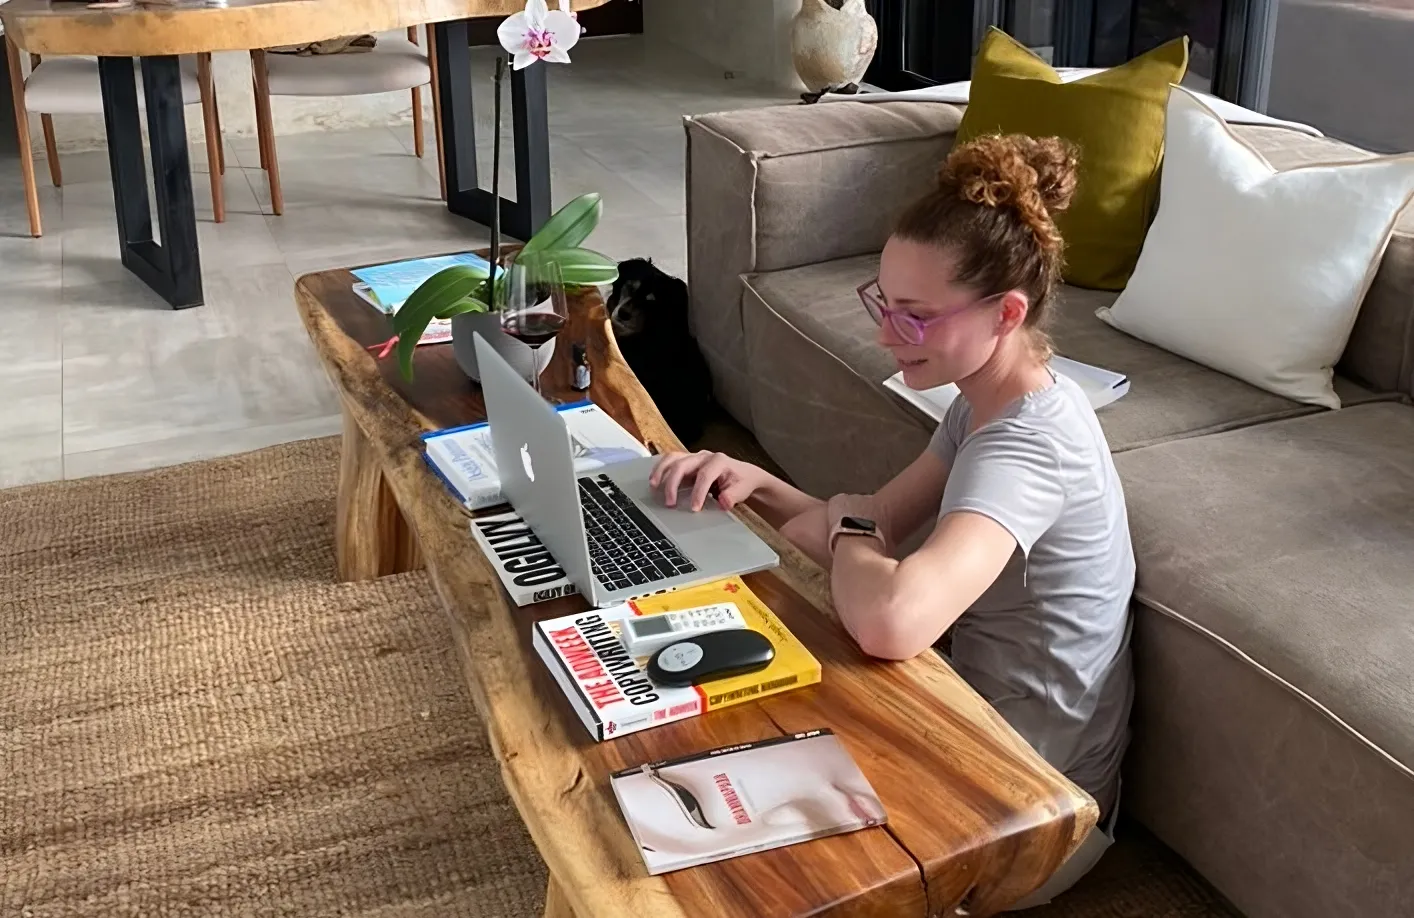 Krystal Ariel diligently working at her laptop in a cozy home environment, embodying the discipline and planning required to become unstoppable in achieving goals.